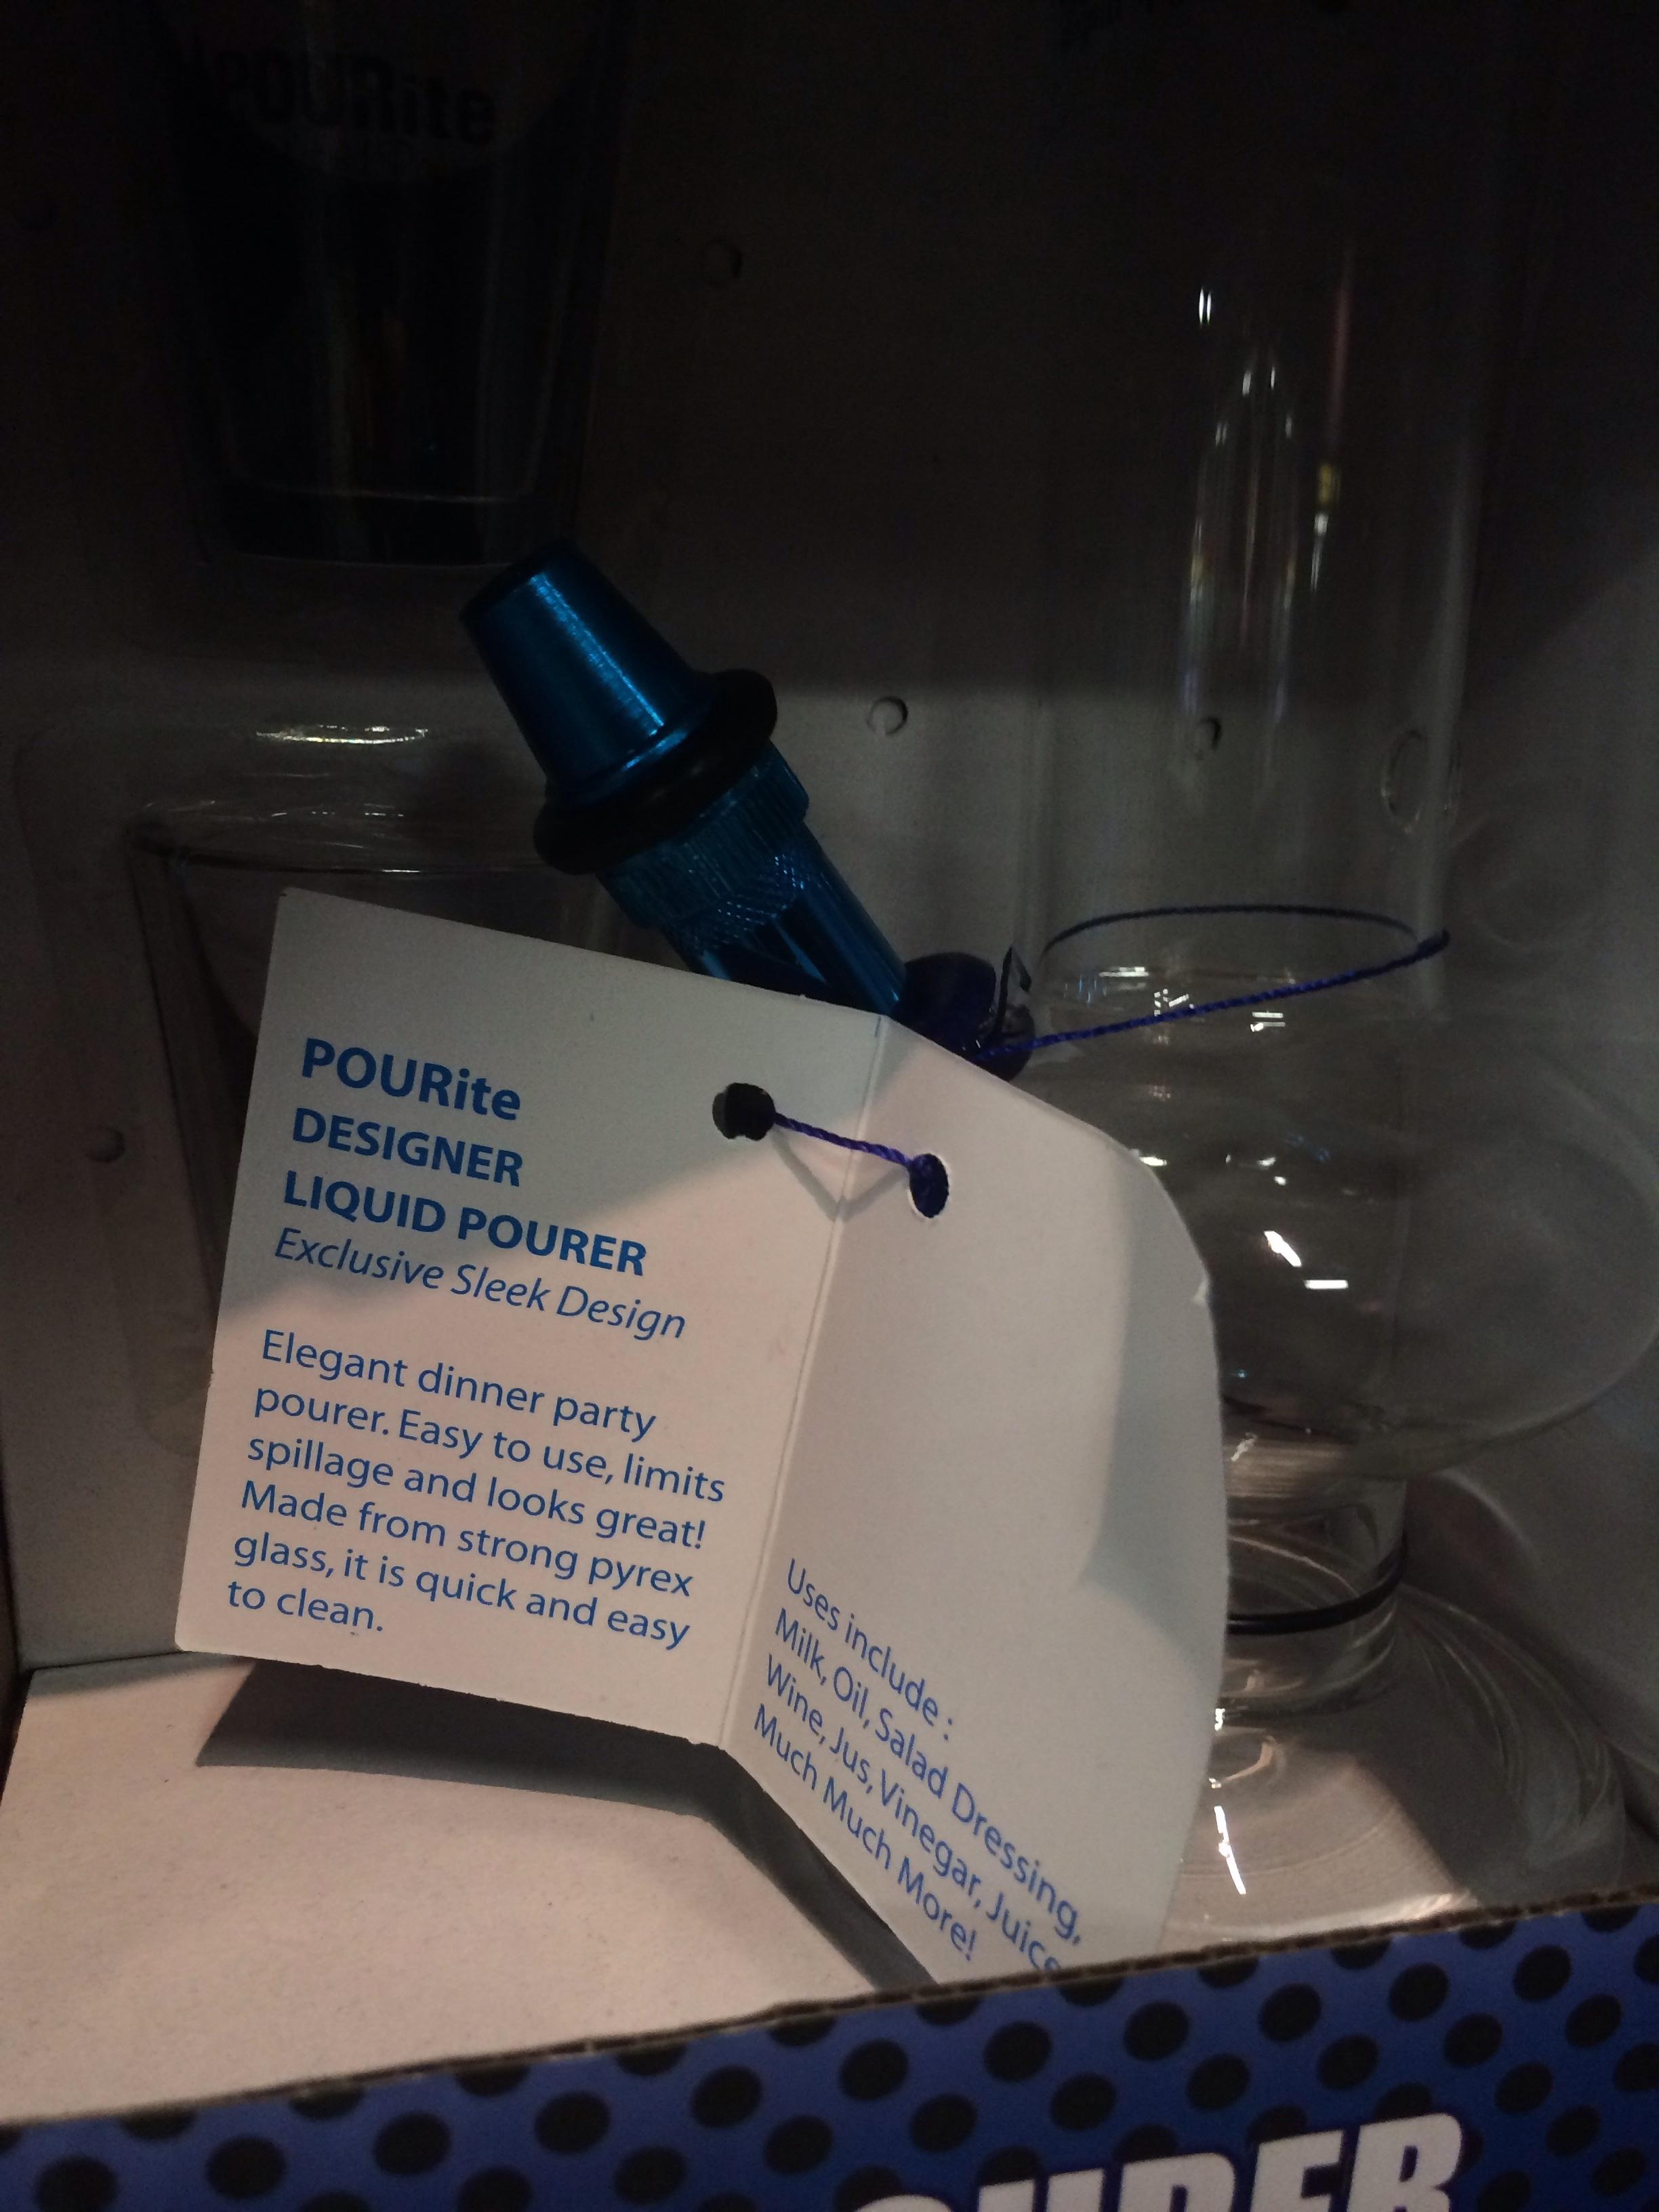 cobalt blue - . POURite Designer Liquid Pourer Exclusive Sleek Design Elegant dinner party pourer. Easy to use, limits spillage and looks great! Made from strong pyrex glass, it is quick and easy to clean. Uses include Much Much More! Wine, Jus, Vinegar, 